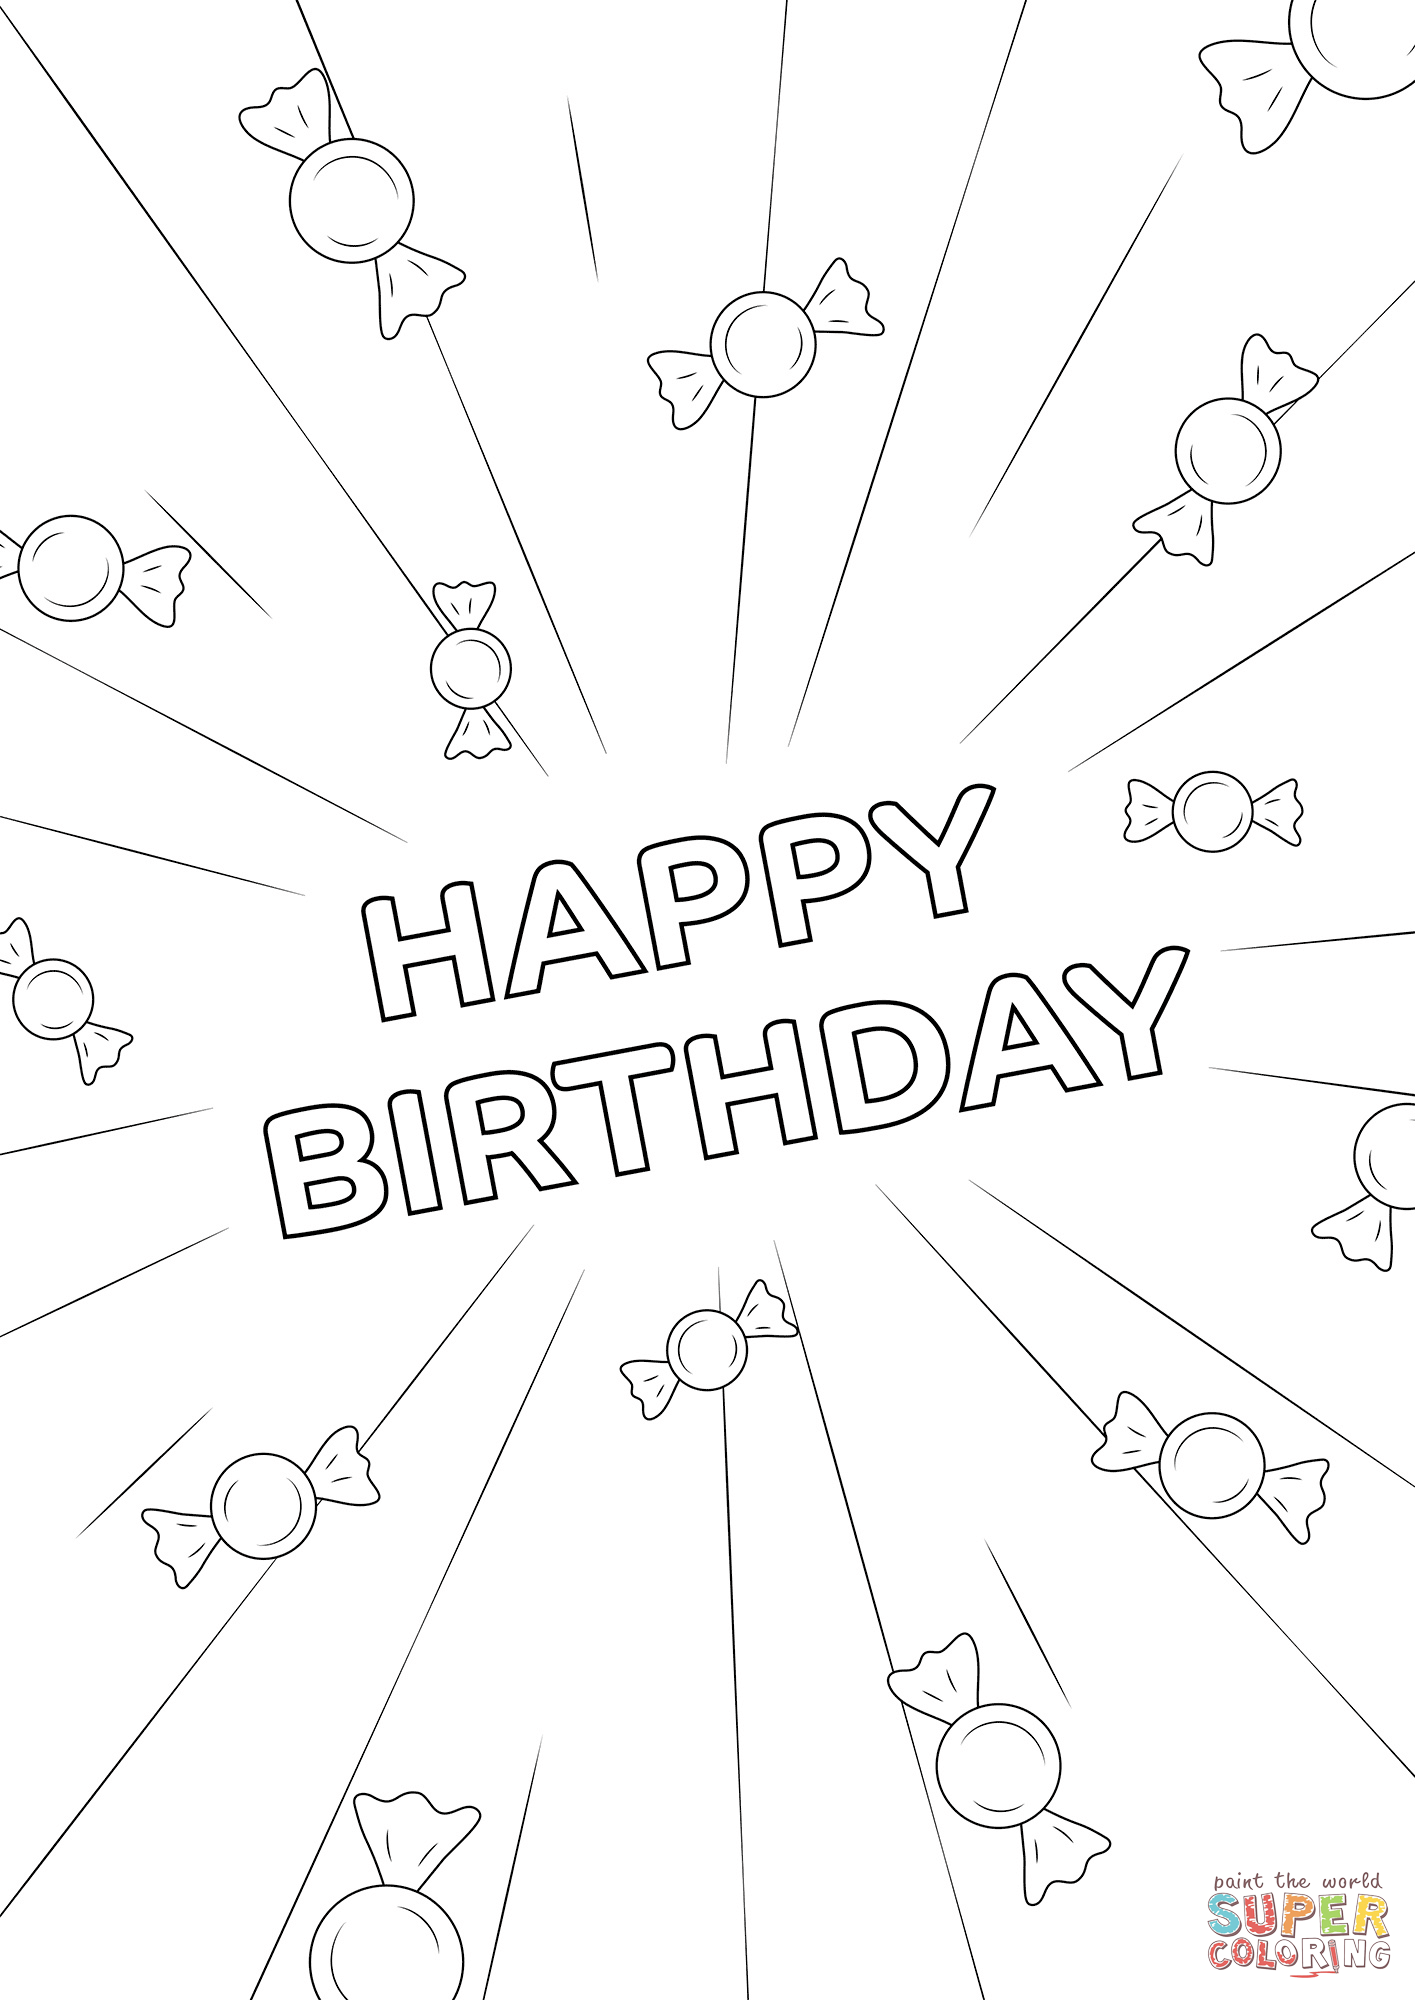 Happy Birthday Card coloring page | Free Printable Coloring Pages